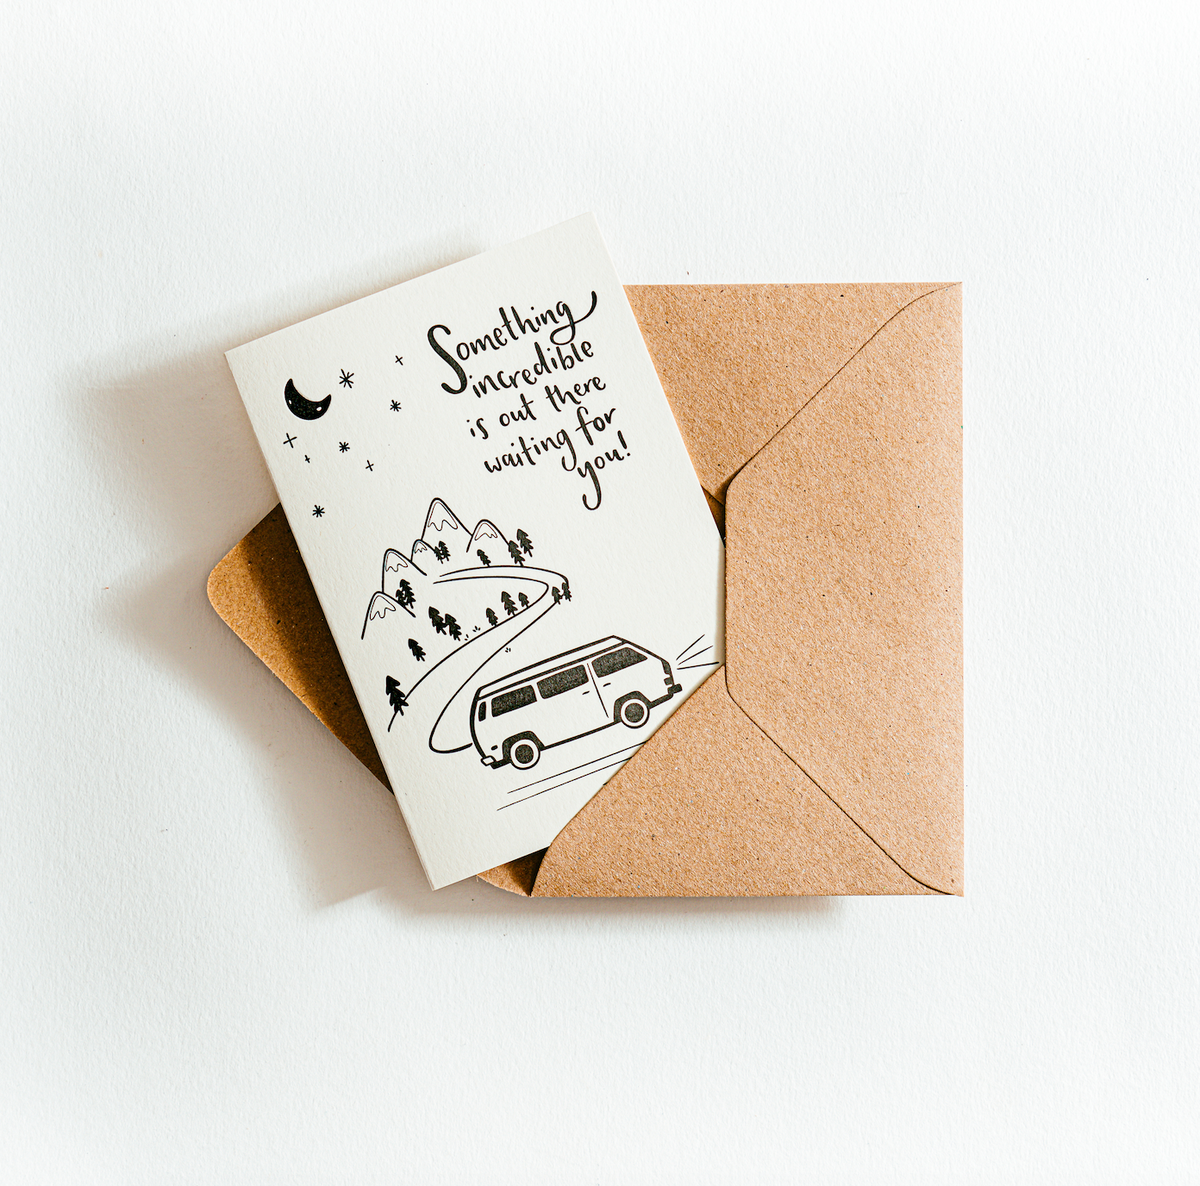 Something Incredible Is Out There Waiting For You Letterpress Coffee Cup Card